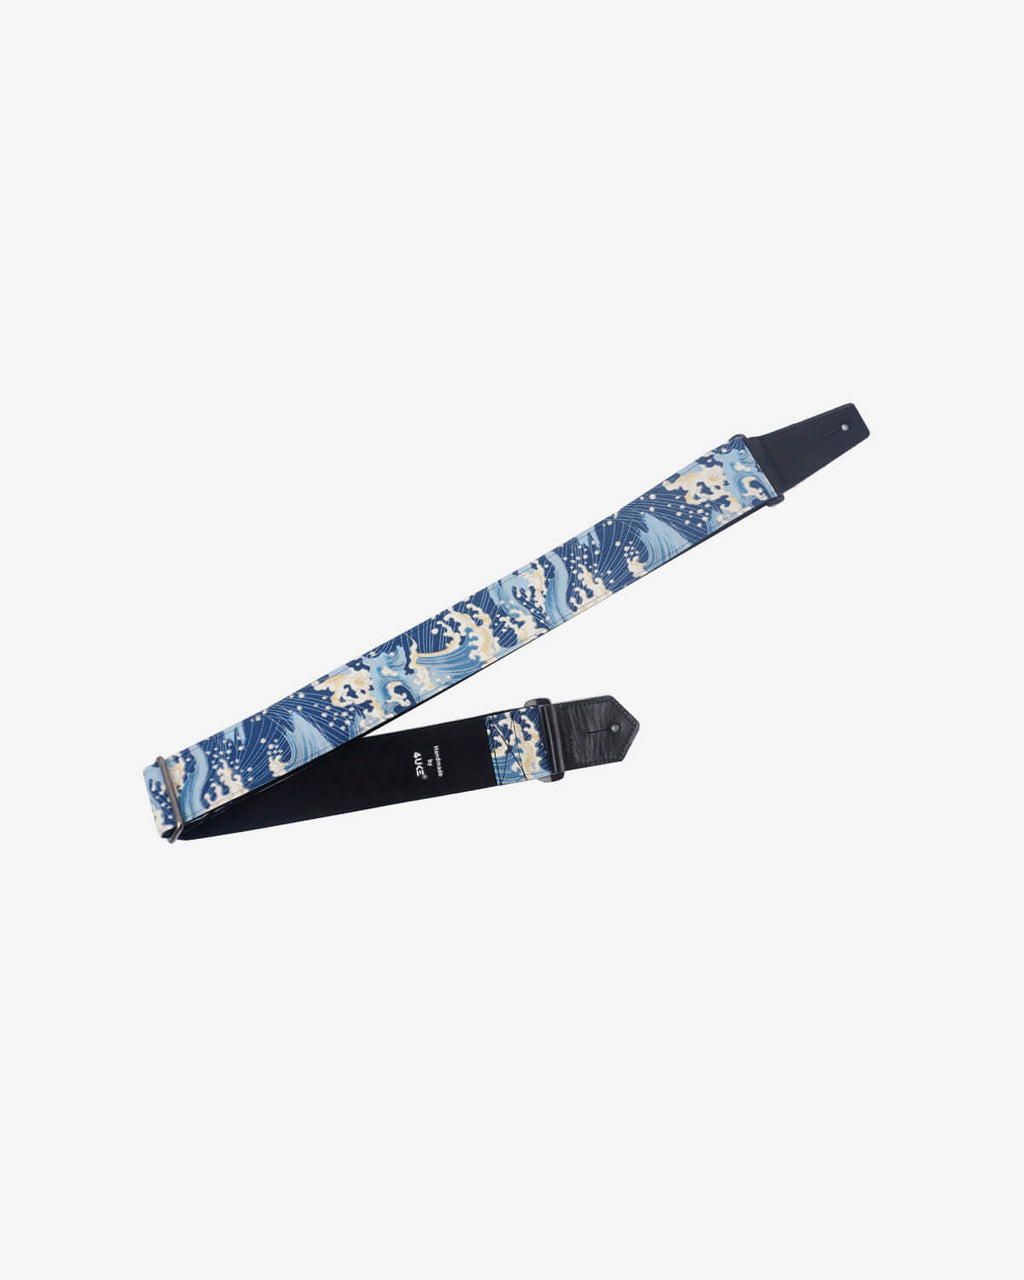 SONIC BOOM 3 Poses/Electric Charge Blues/Grays Buckle-Down GS-WSTH026 Guitar Strap 2 Wide & 29-54 Length